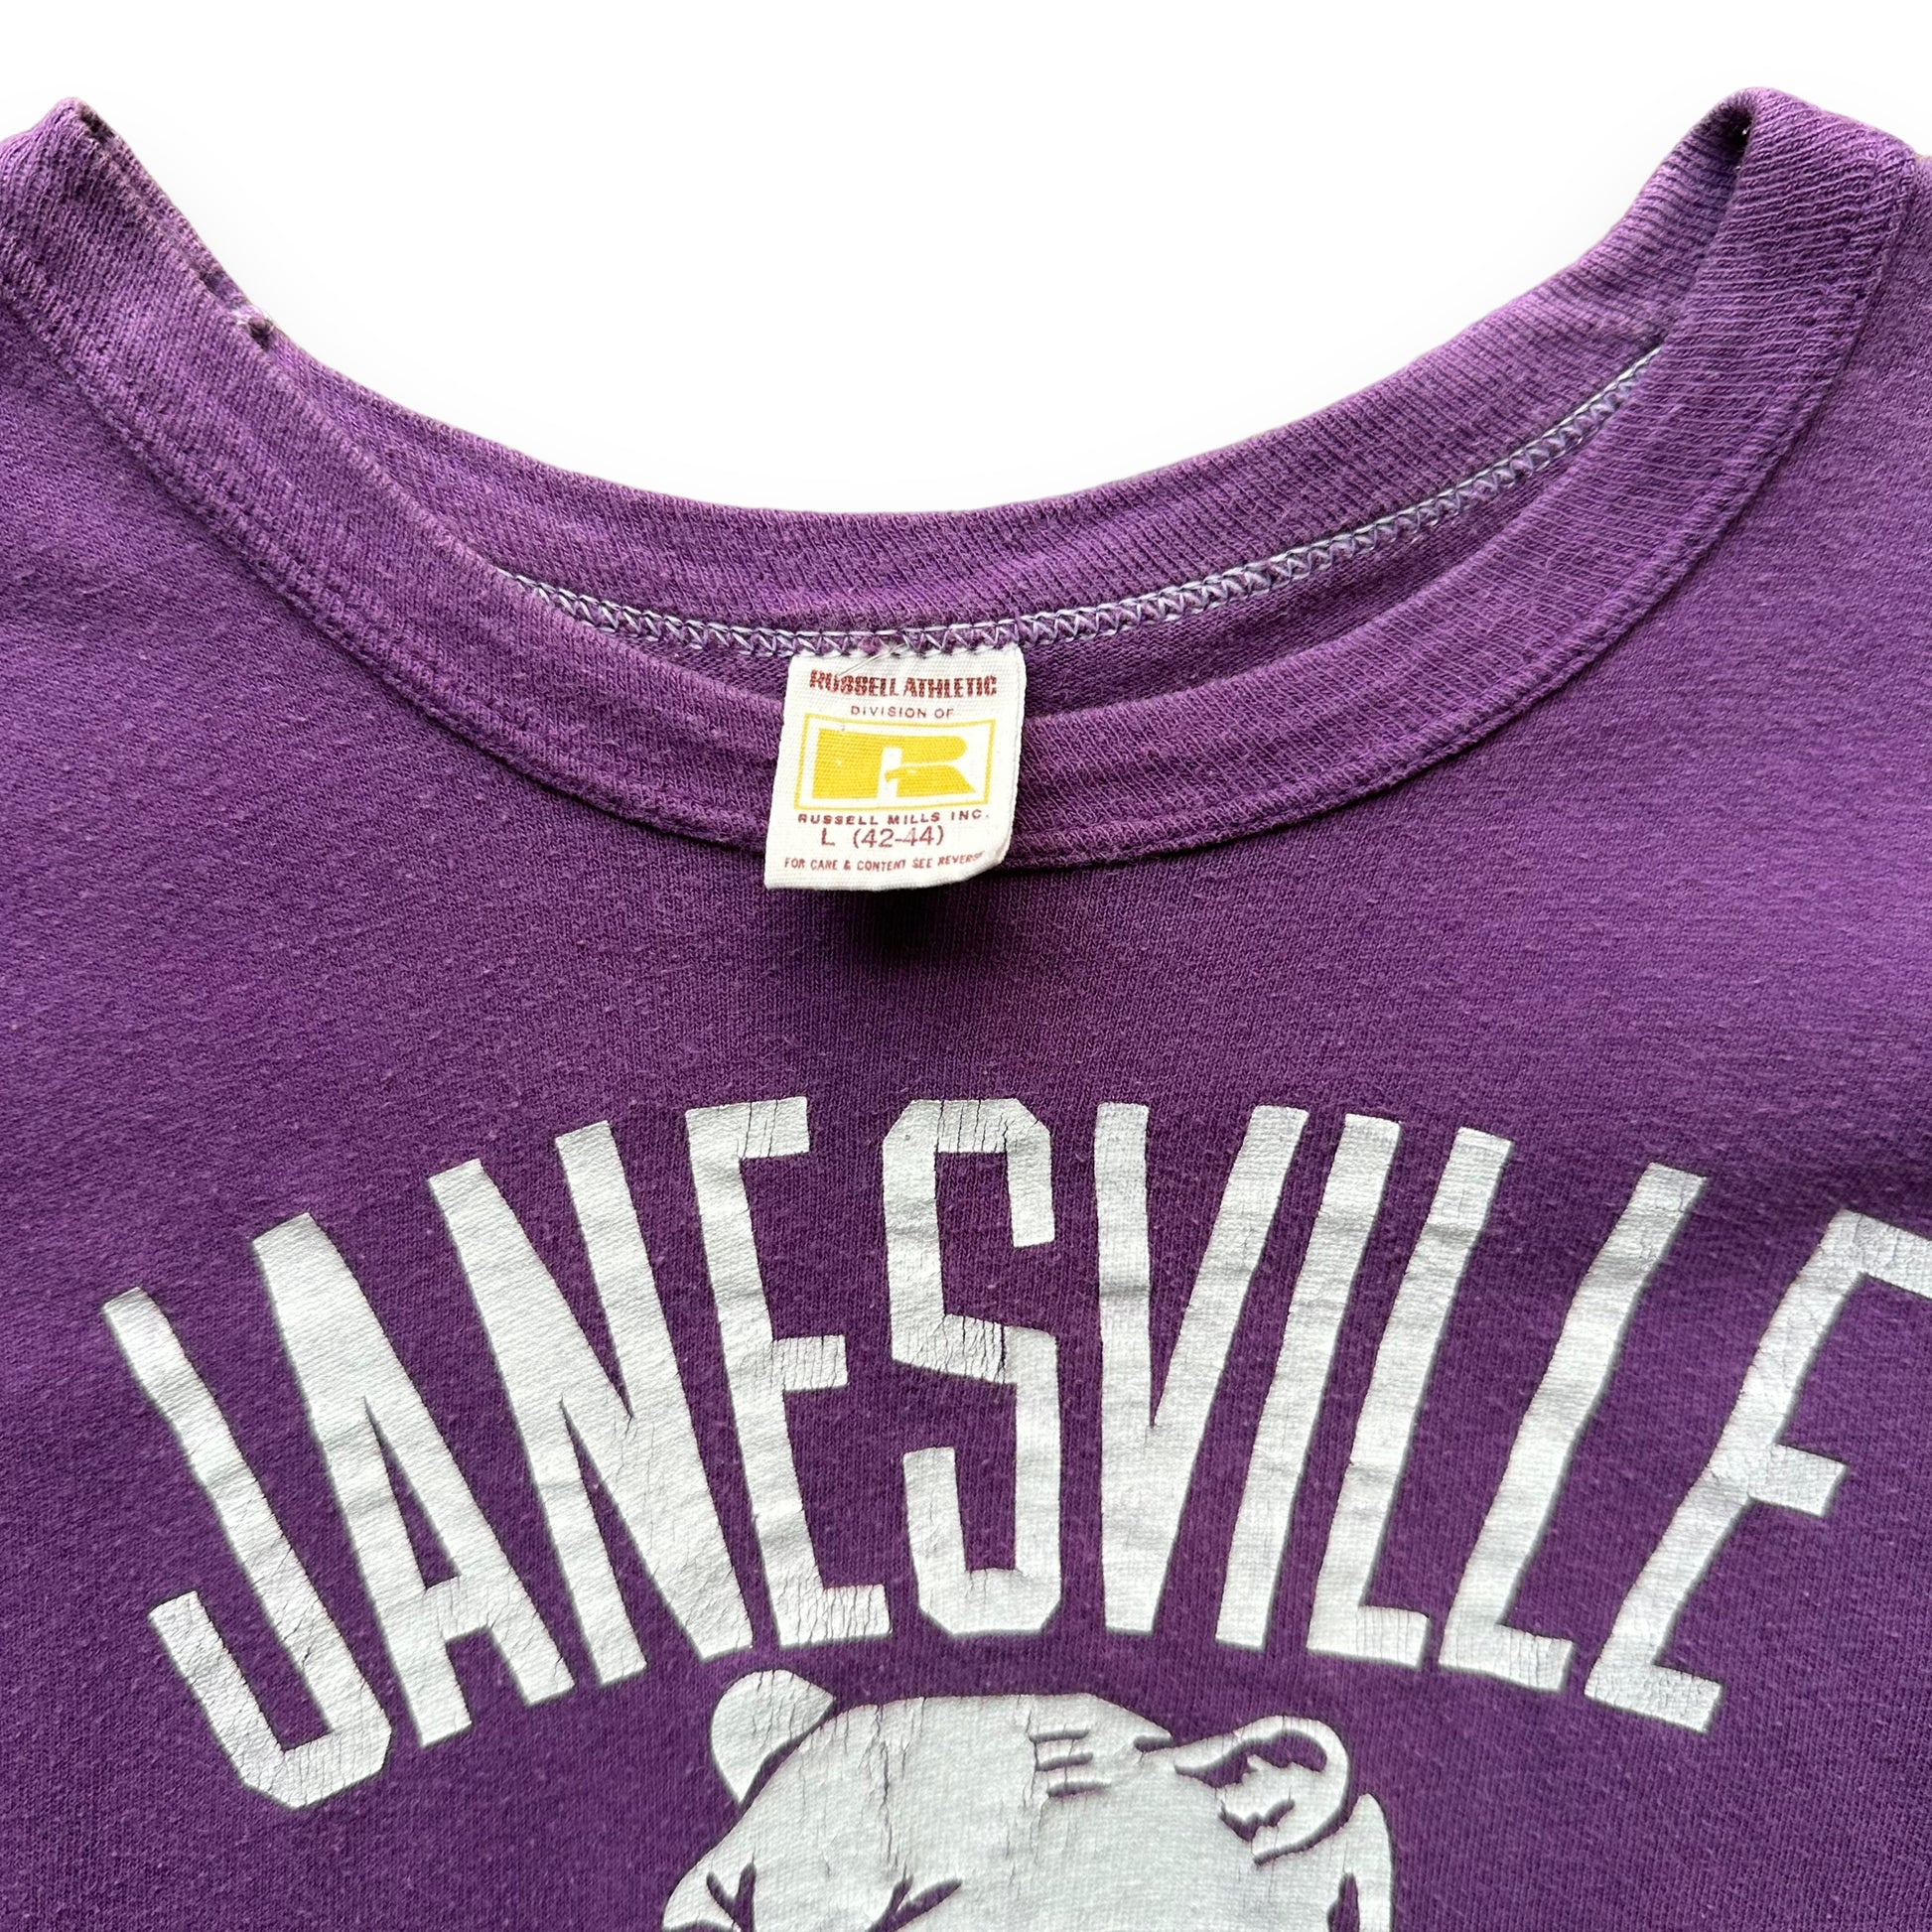 Tag View on Vintage Russell Athletic Janesville Tigers Tee SZ L | Vintage T-Shirts Seattle | Barn Owl Vintage Tees Seattle